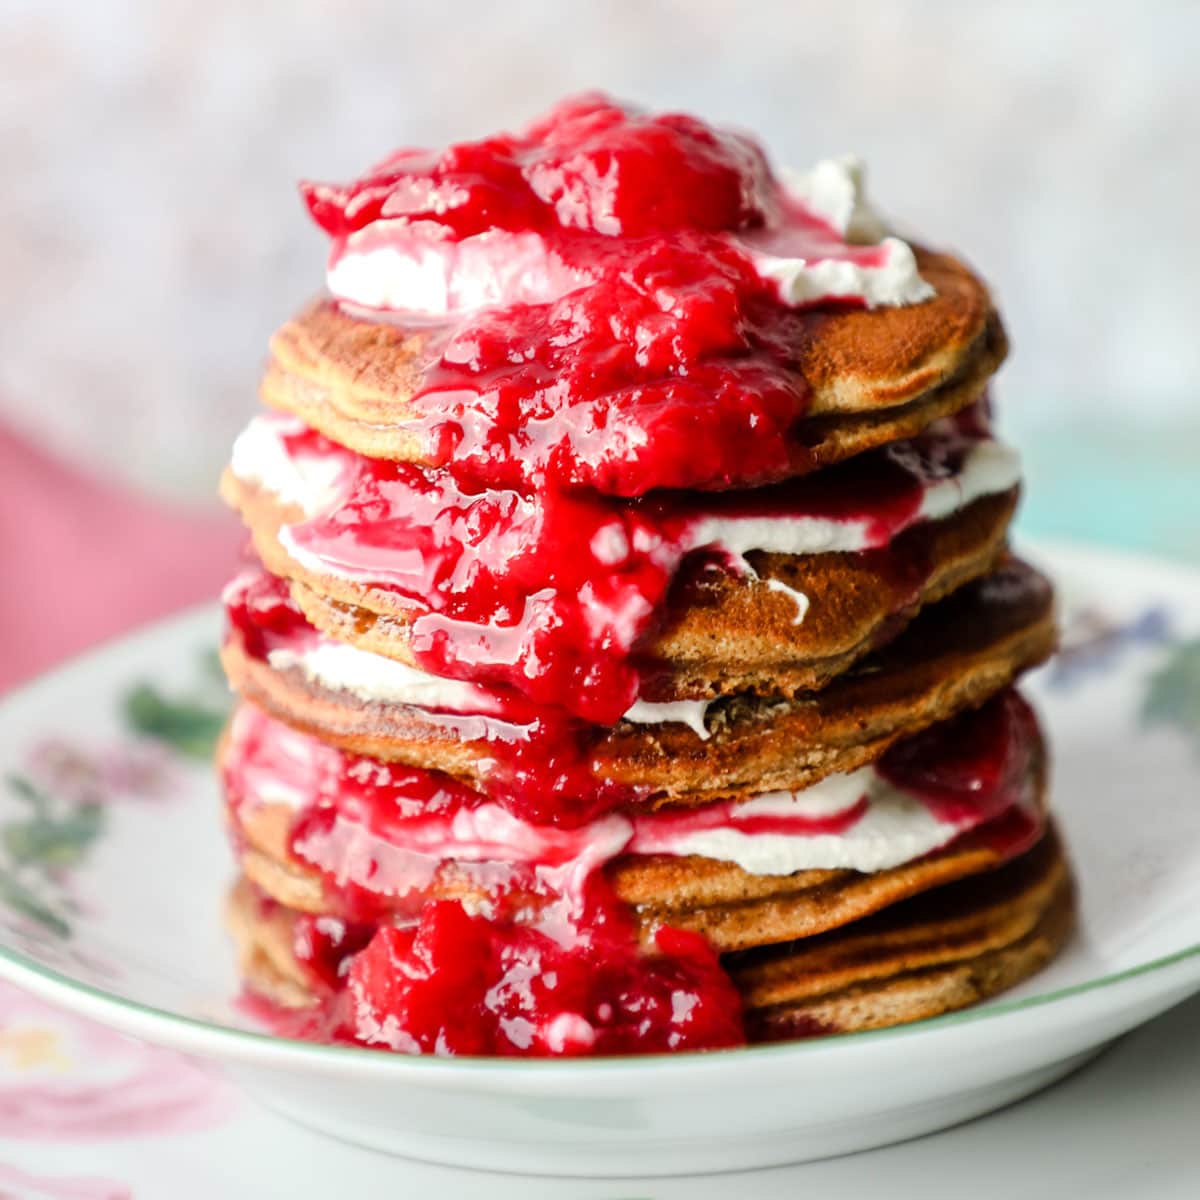 https://www.farmersgirlkitchen.co.uk/wp-content/uploads/2015/02/Cinnamon-Spice-Pancakes-with-Plum-Compote.jpg